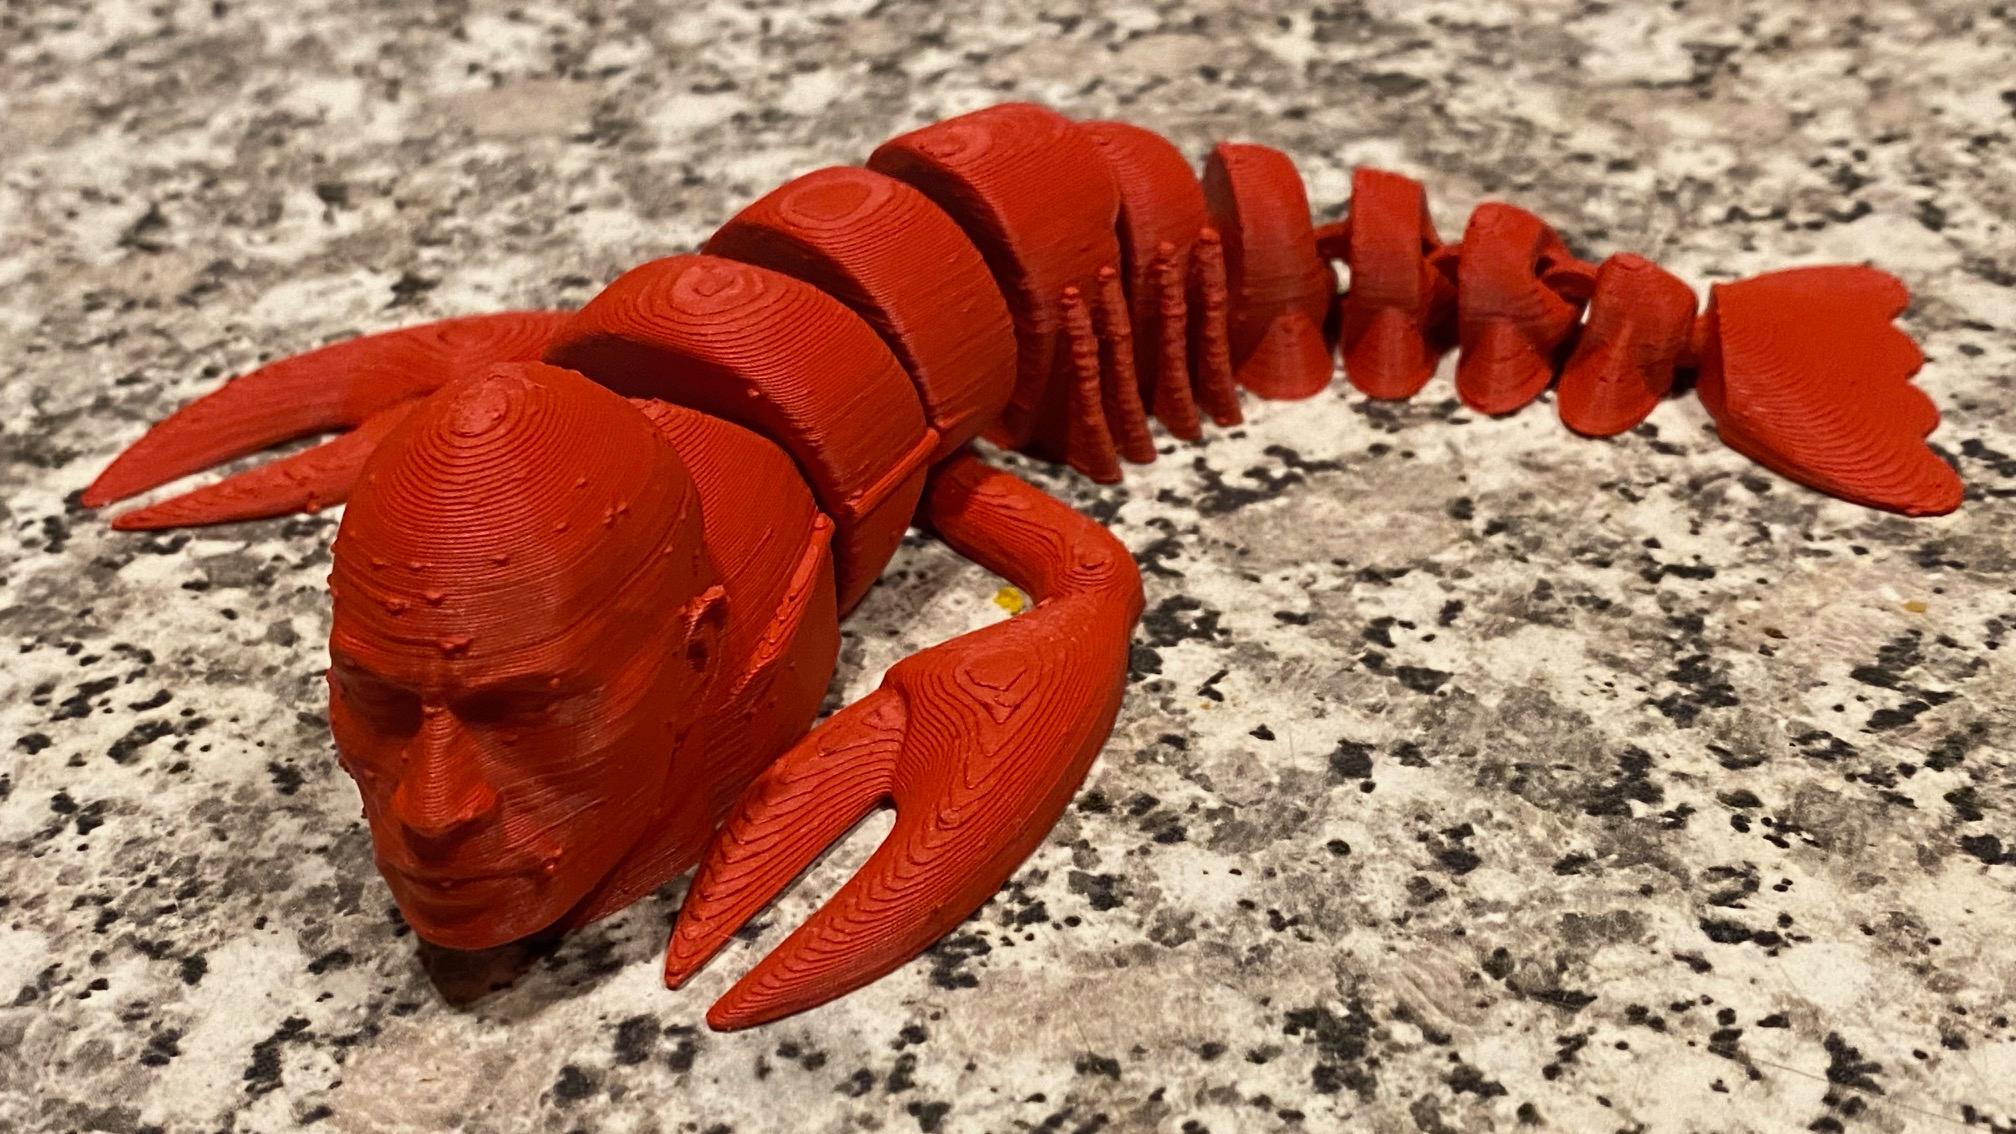 The Rock Lobster - So many zits! But I got an eye roll from my wife, so mission accomplished. - 3d model